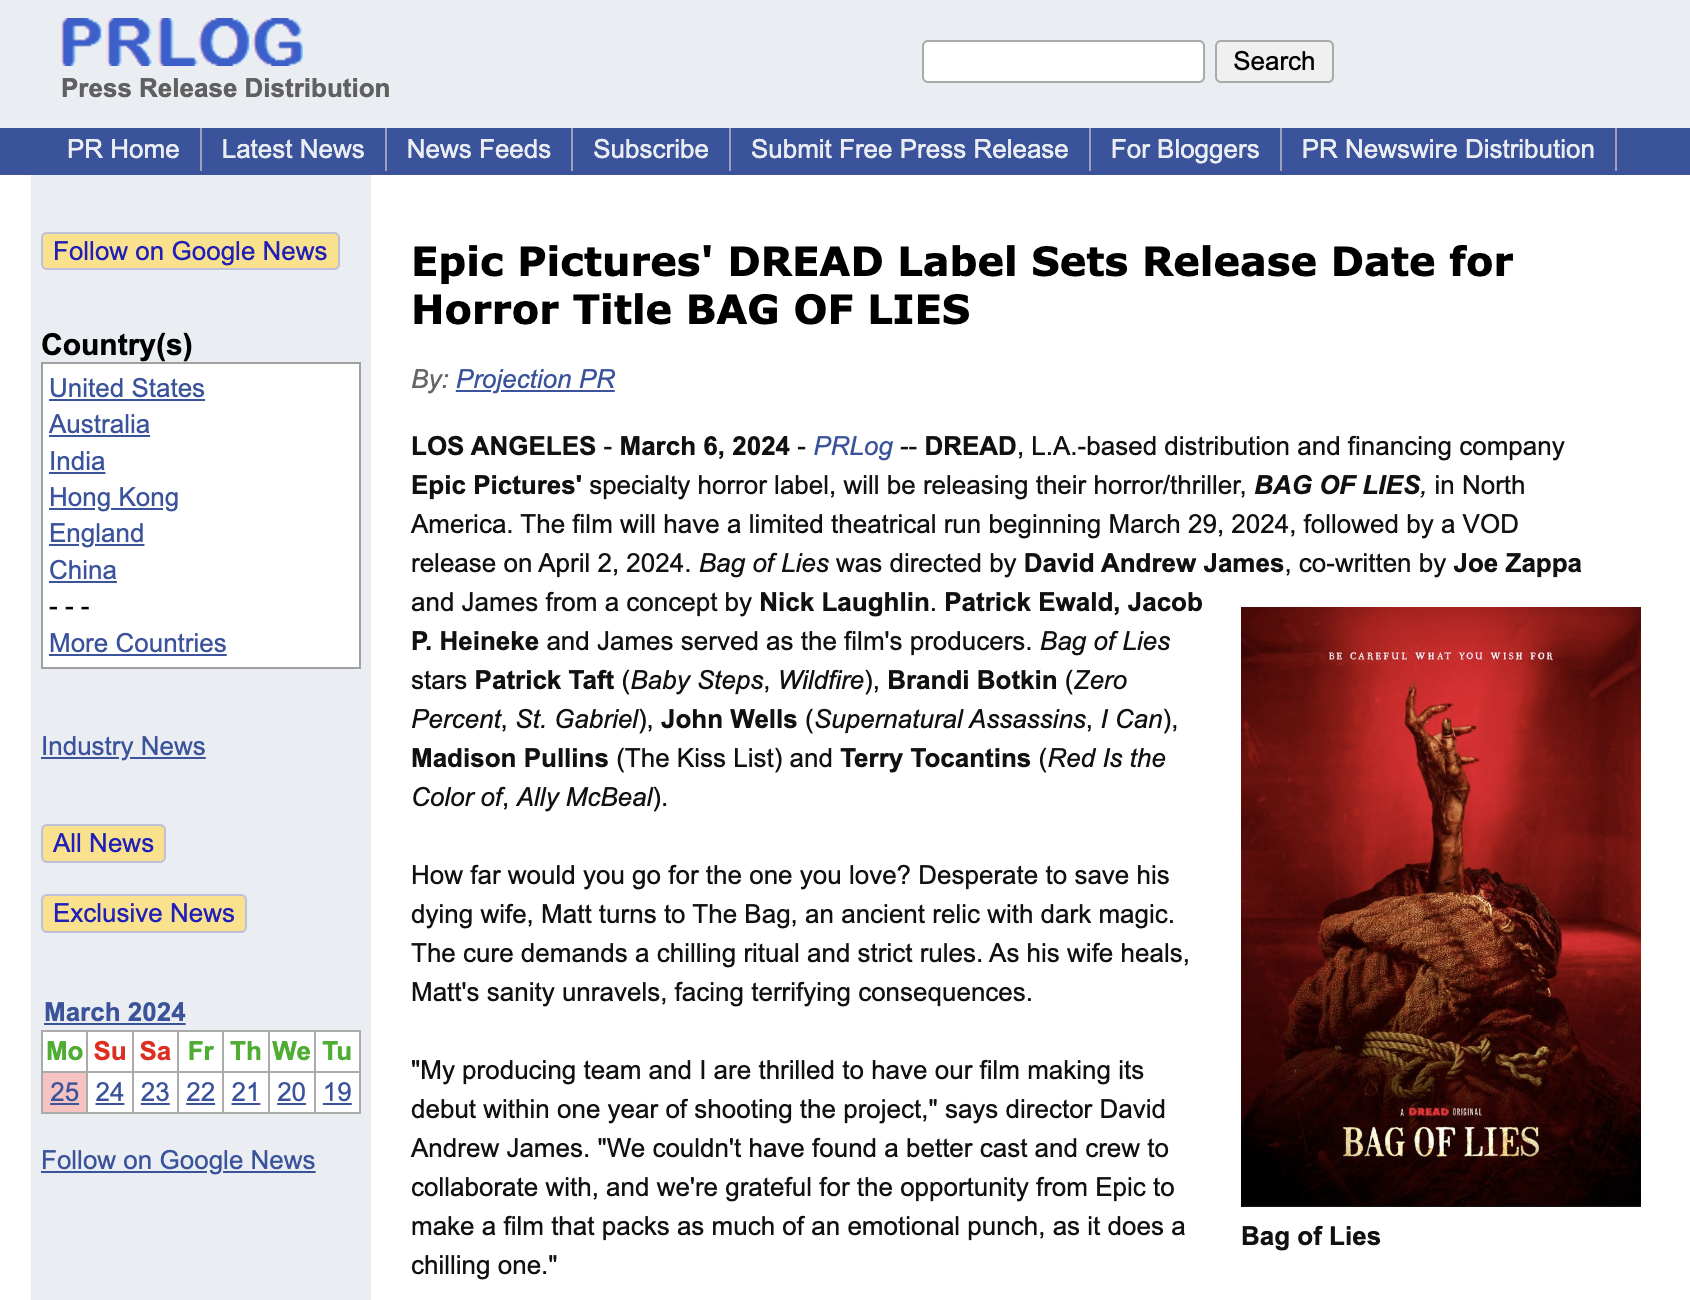 Epic Pictures' DREAD Label Sets Release Date for Horror Title BAG OF LIES